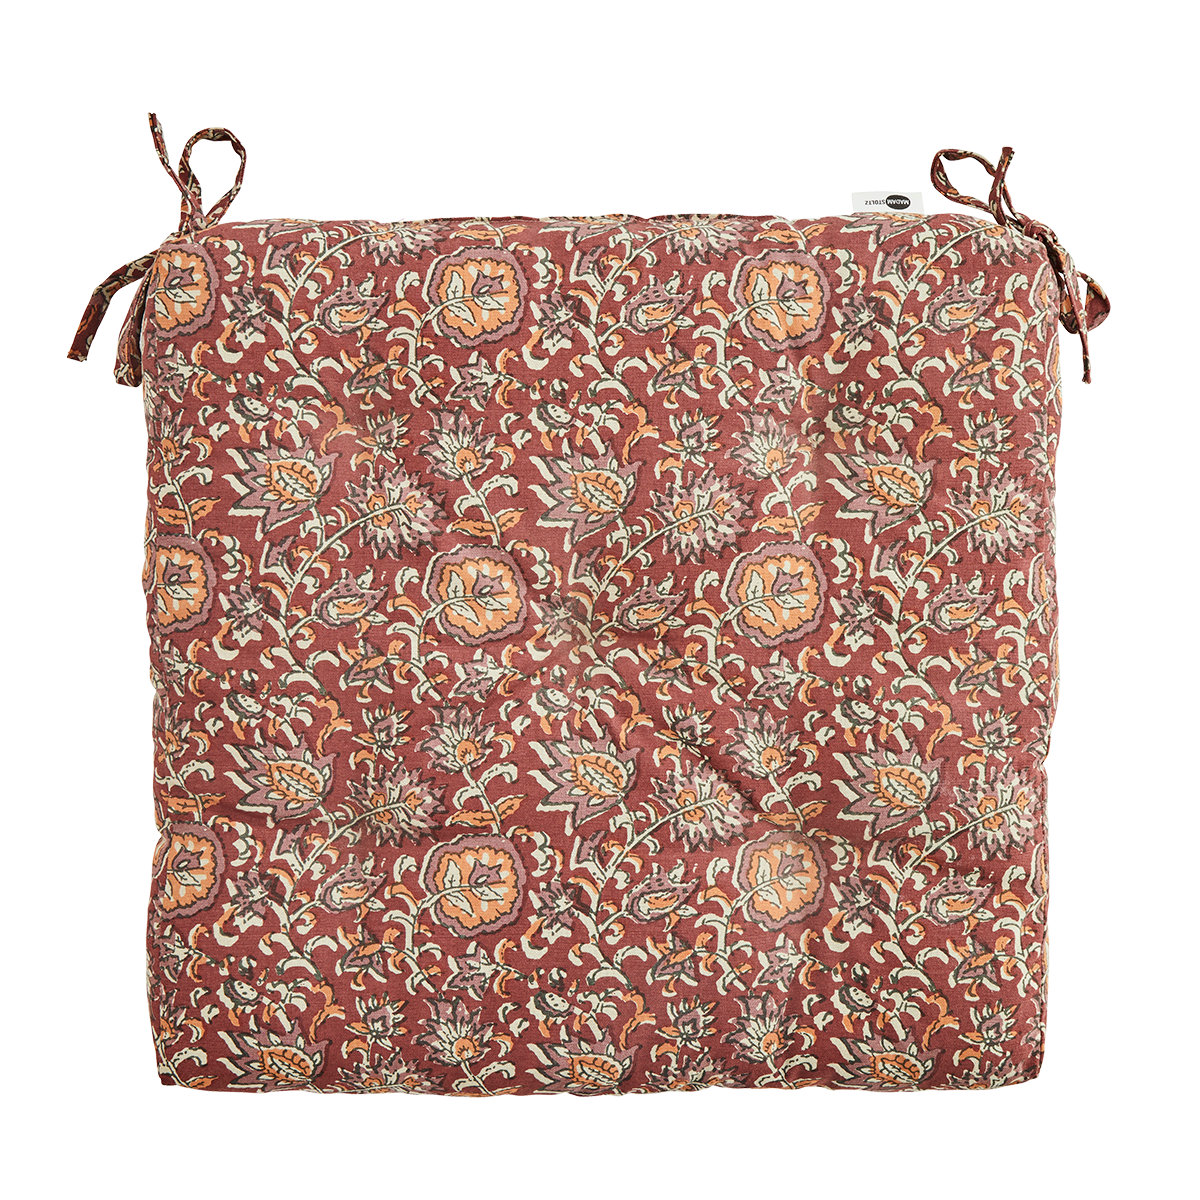 Double sided printed cotton chair pad - Paprika, dusty rose